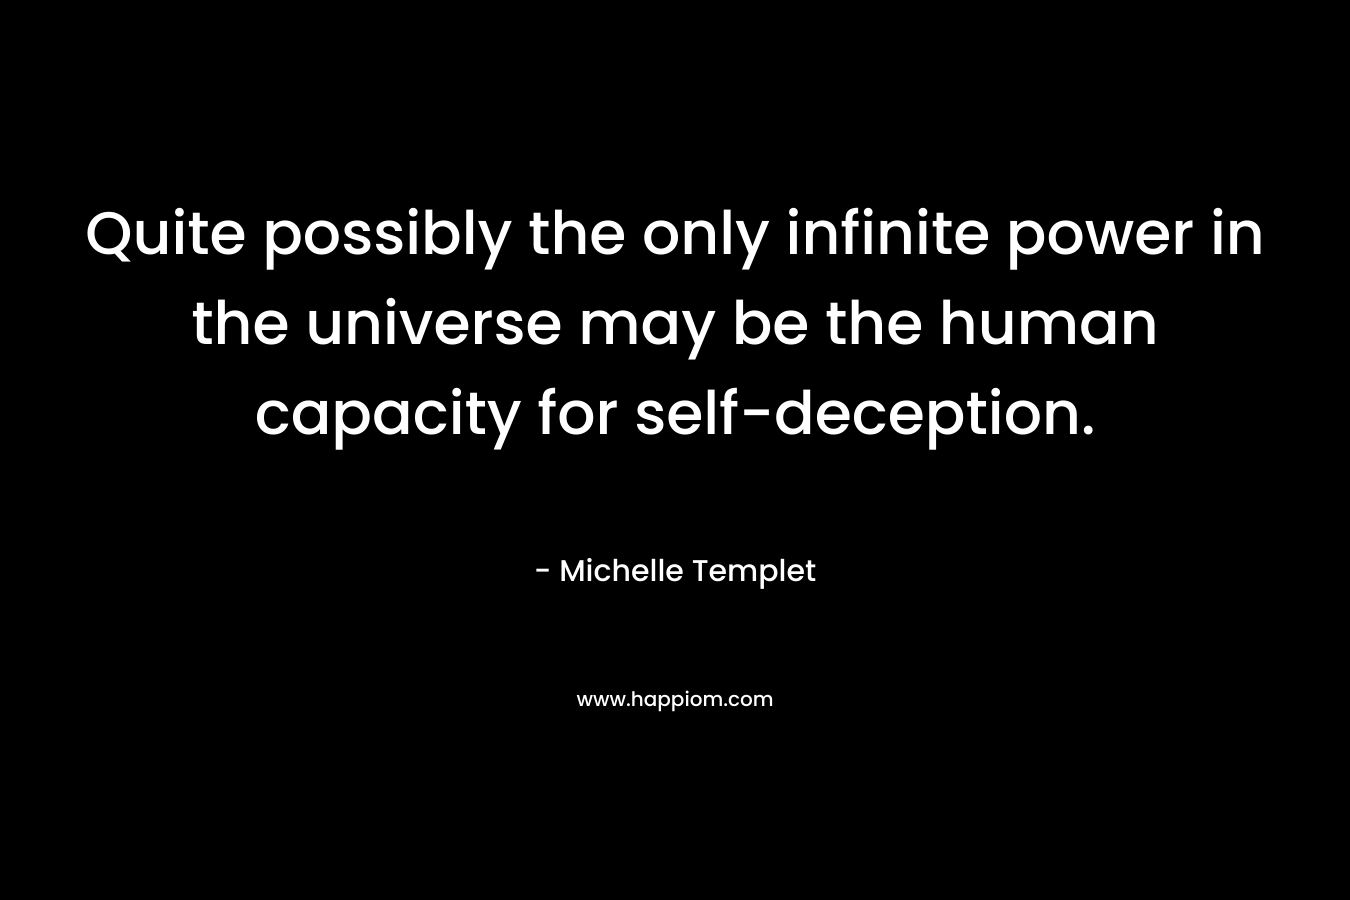 Quite possibly the only infinite power in the universe may be the human capacity for self-deception. – Michelle Templet